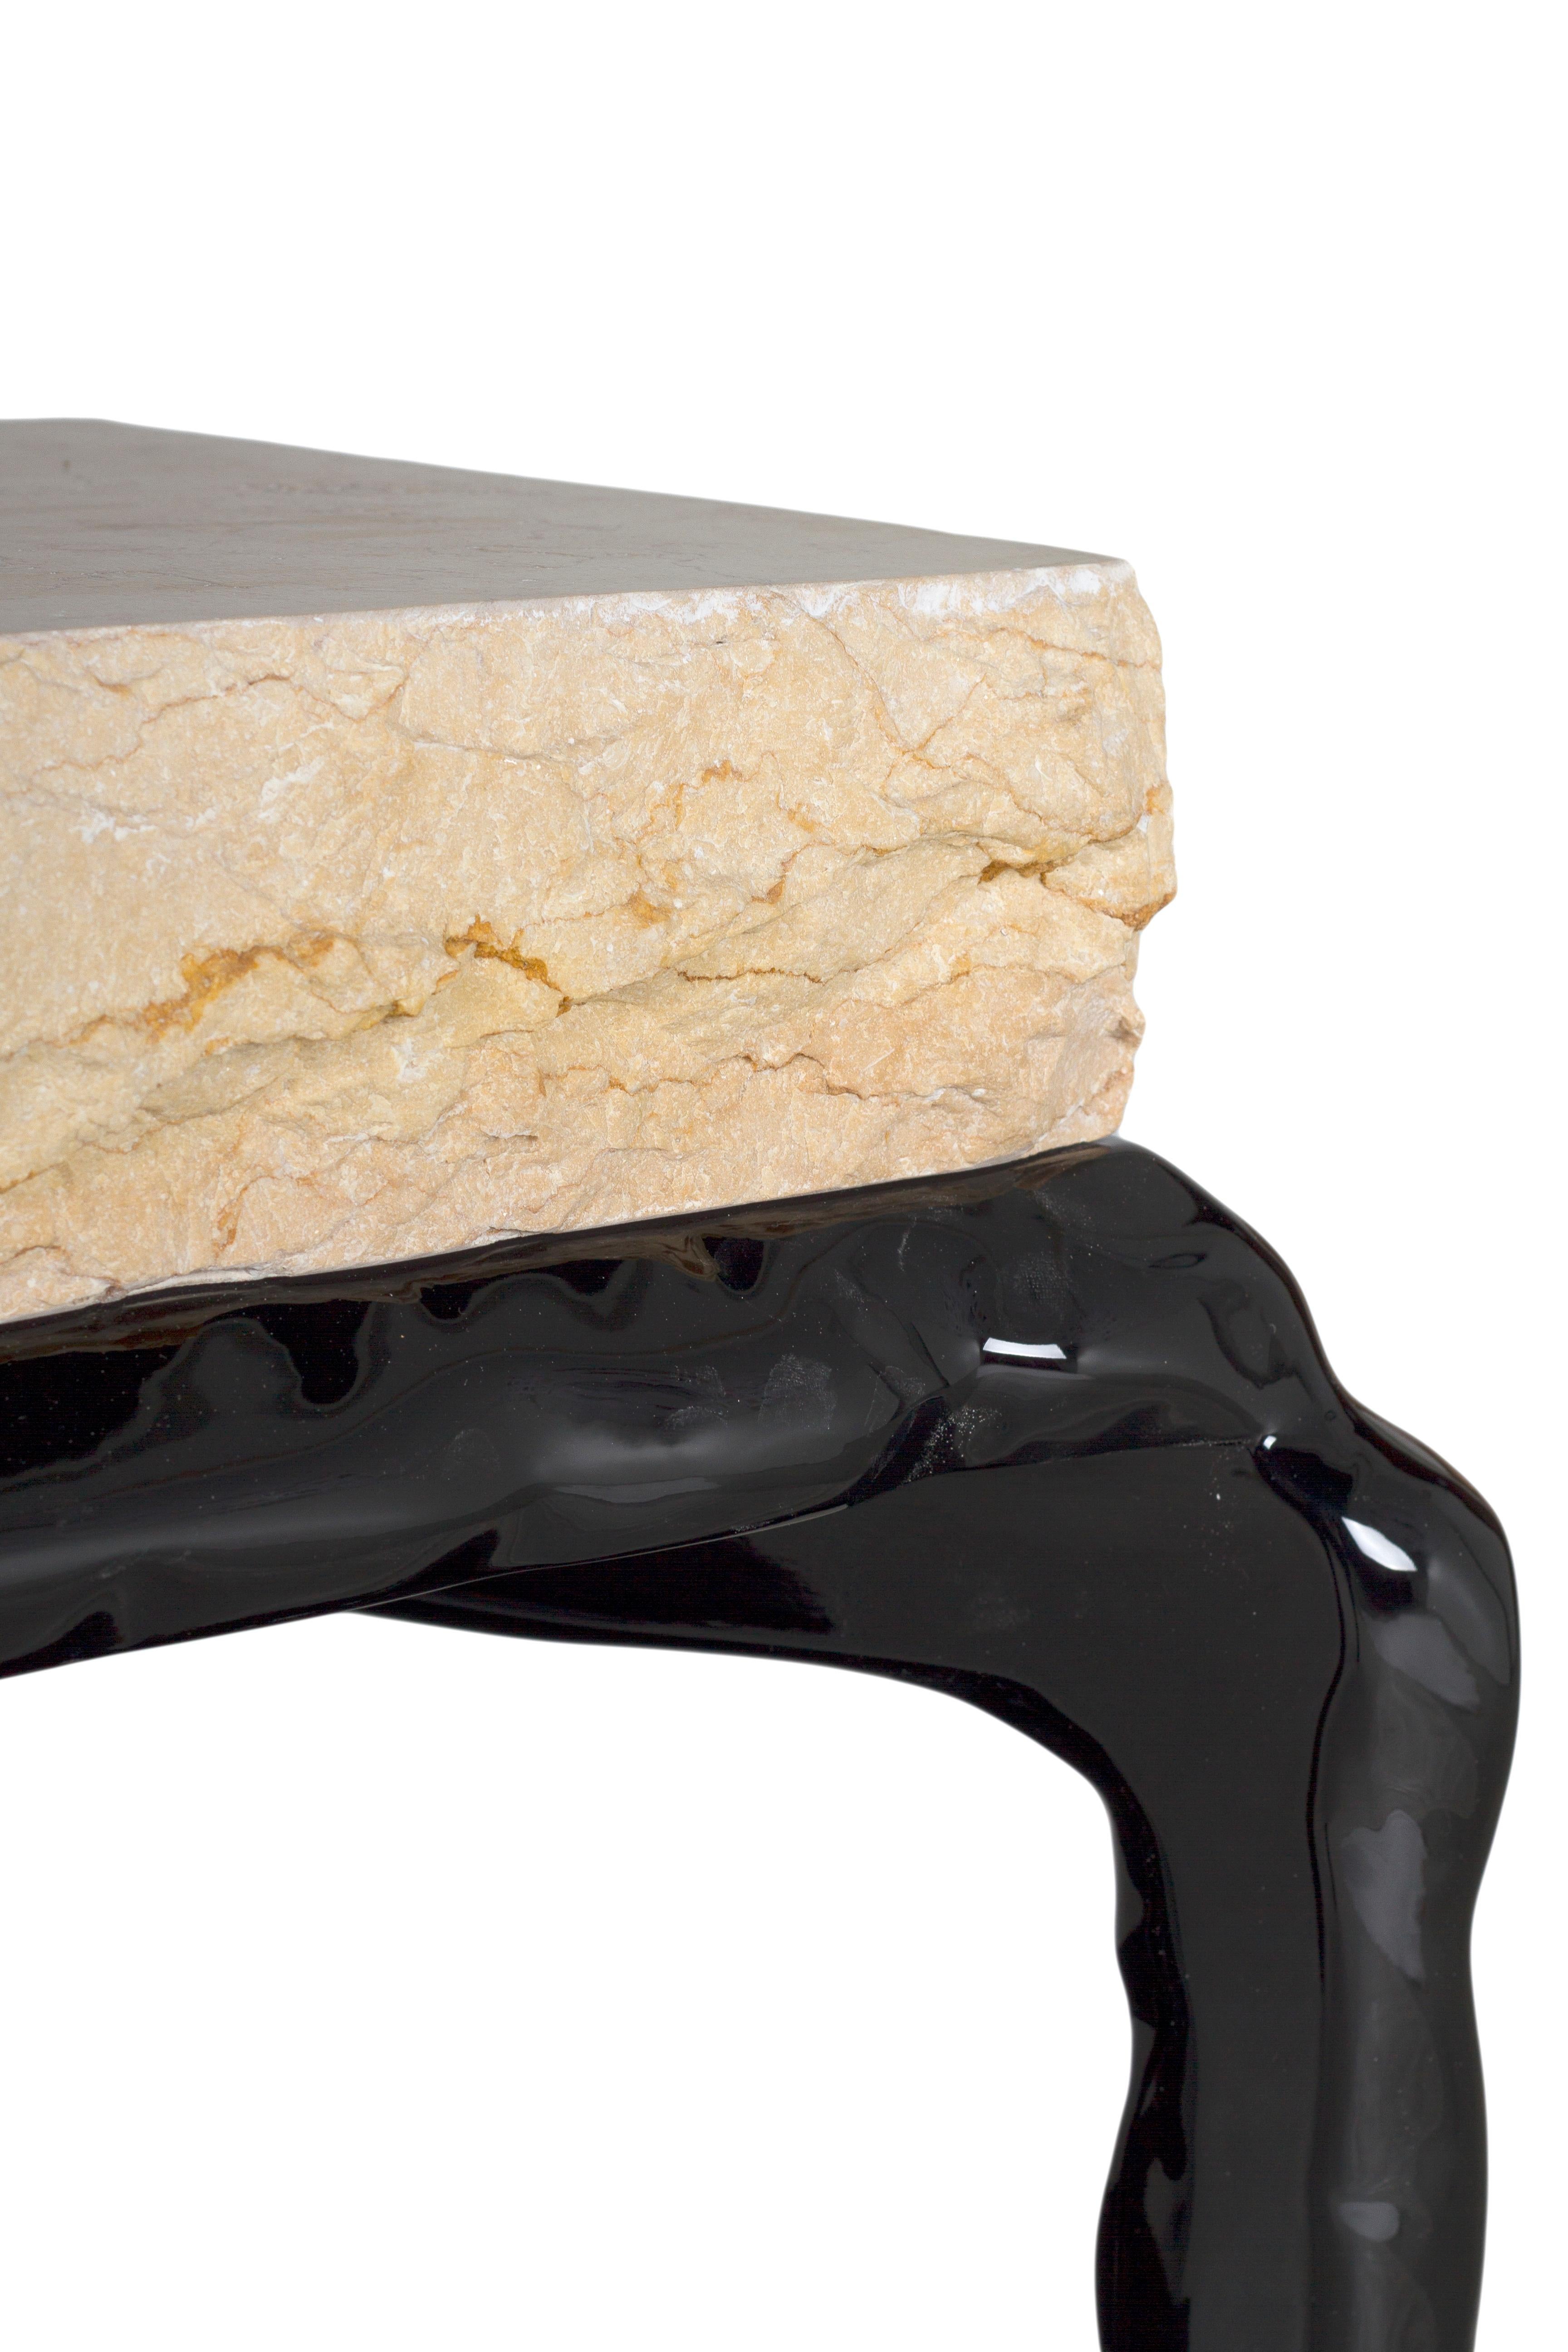 Onyx Art Deco Stone Coffee Table Marble Handmade in Portugal by Greenapple For Sale